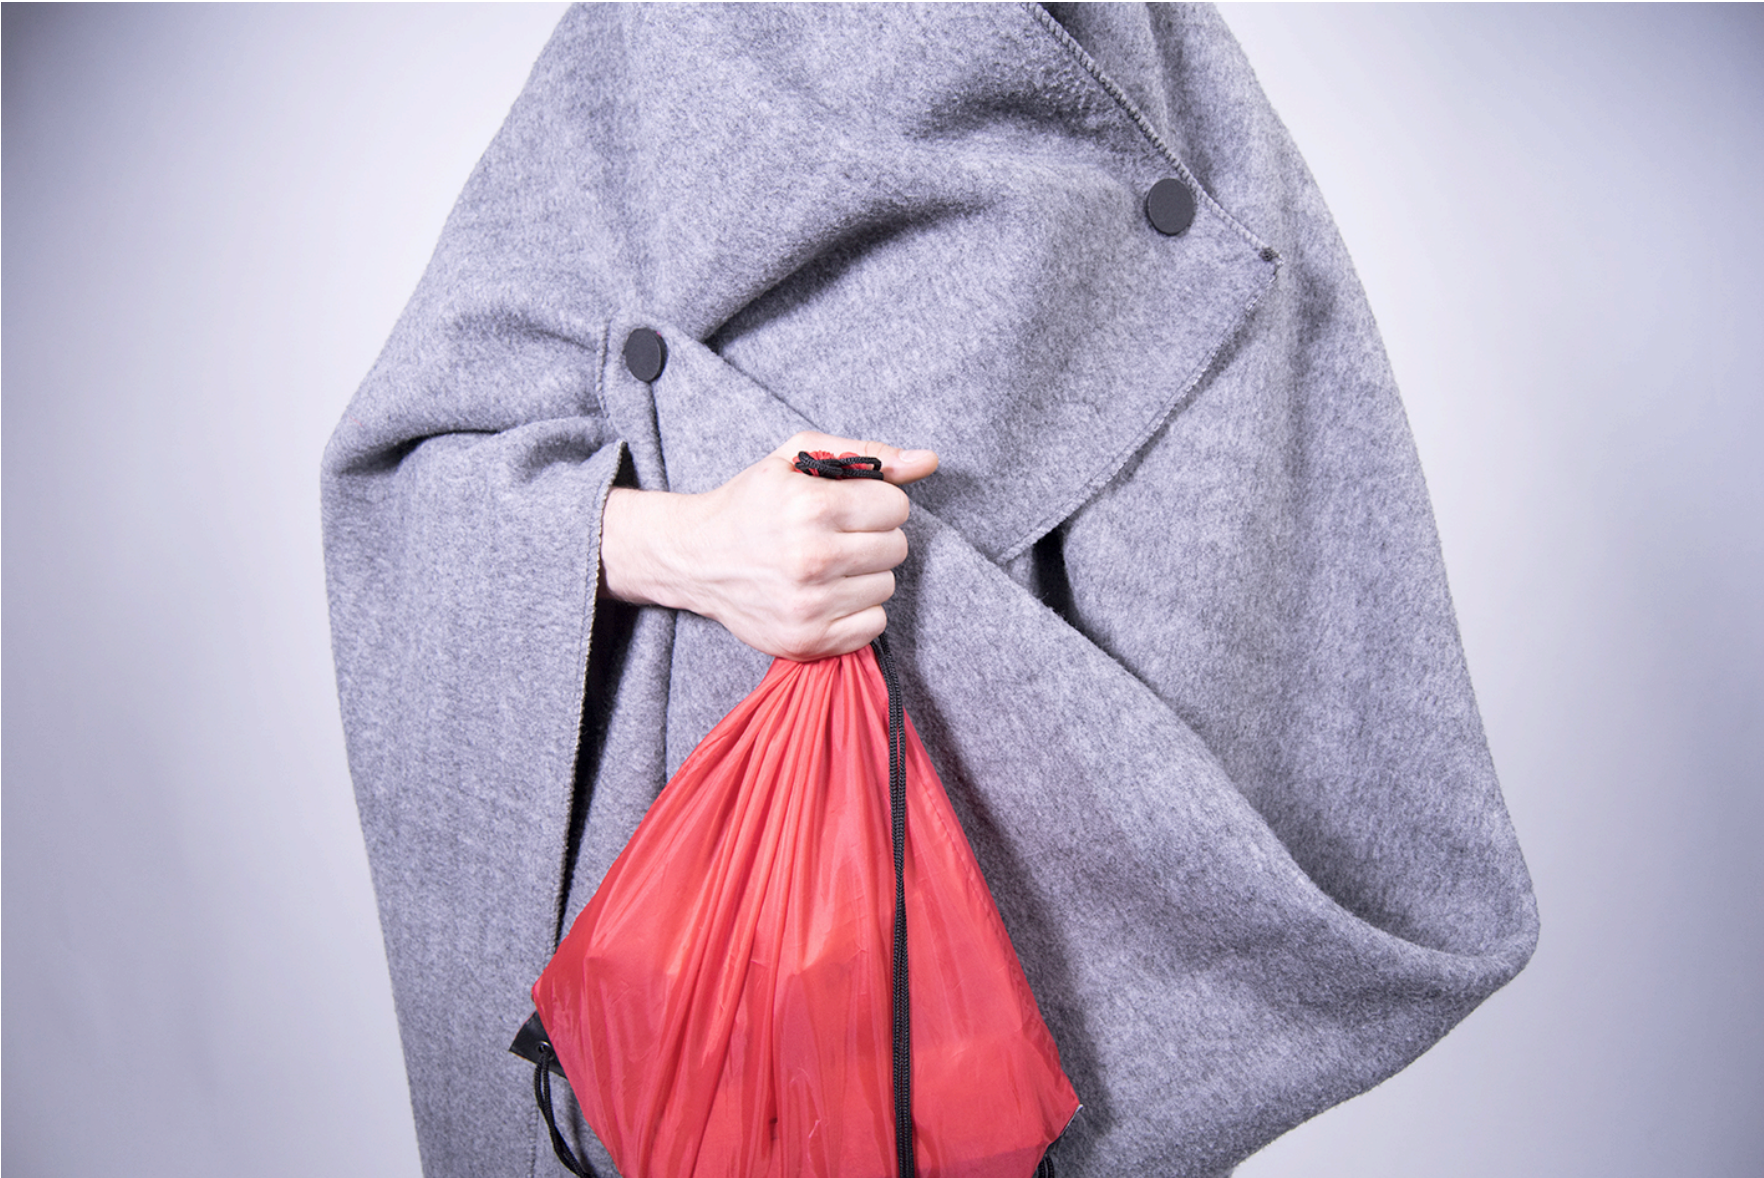 Torso of a person wearing an adapted UNHCR blanket and holding a red bag